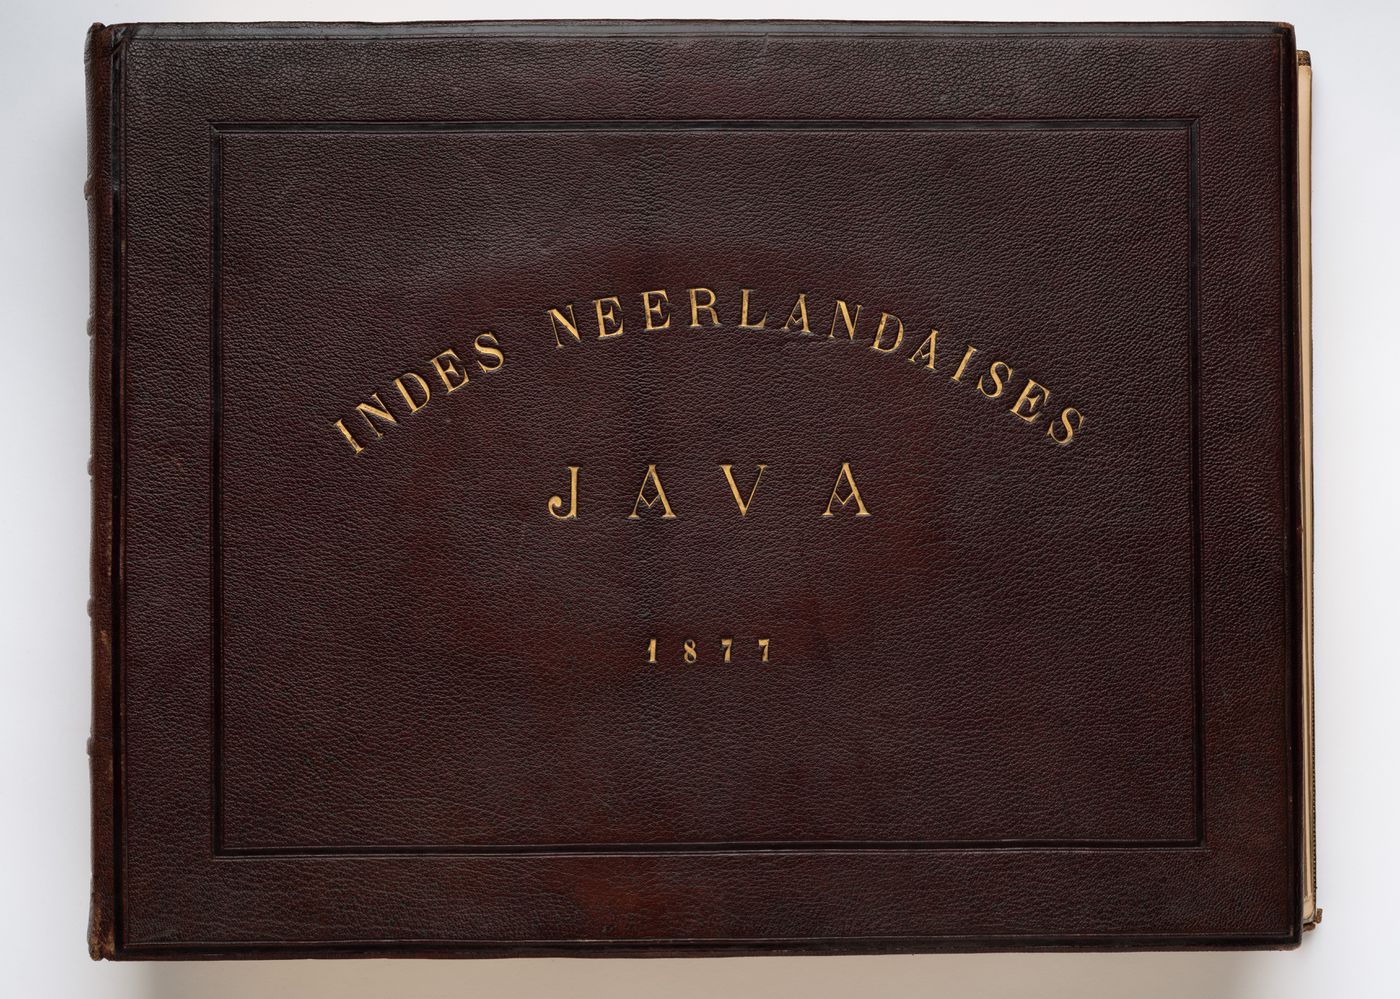 Album of portraits, a photograph of a painted portrait, still lifes and views of architecture and topography in the Dutch East Indies (now Indonesia)